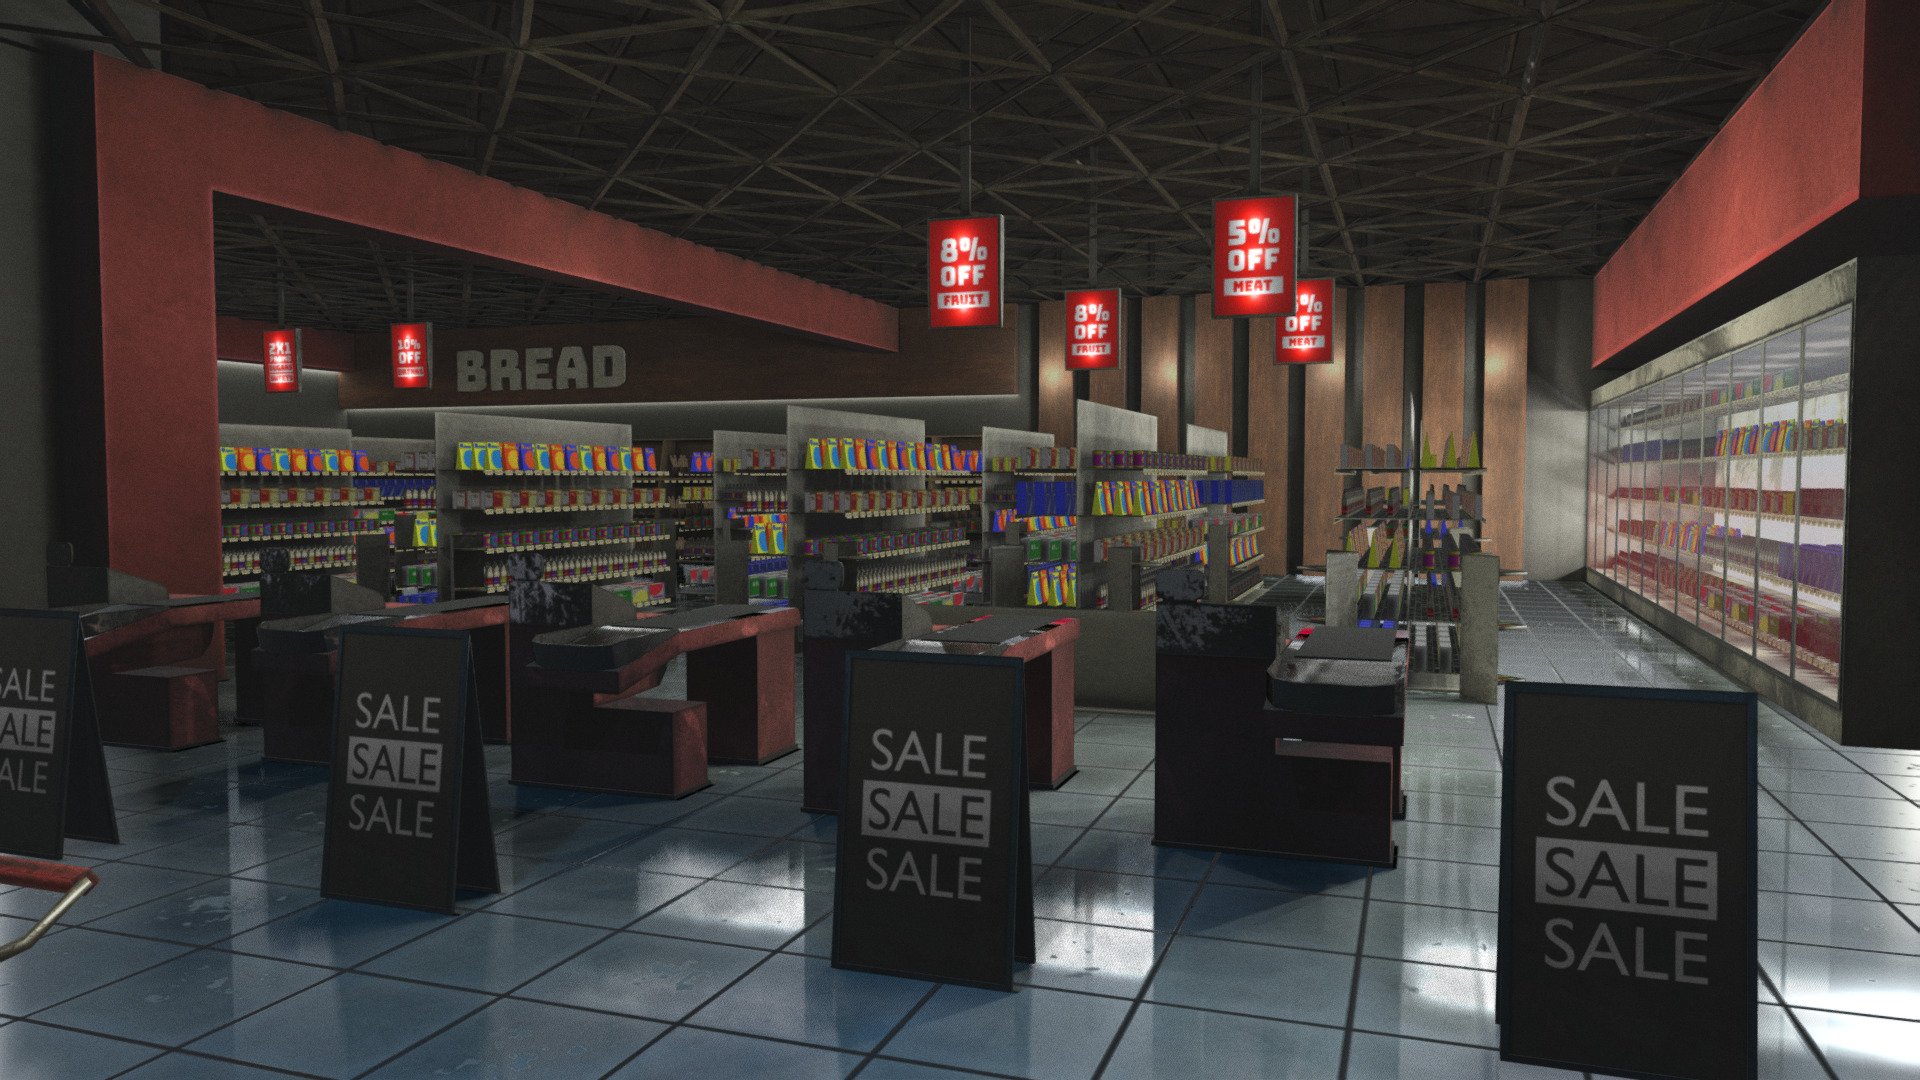 VR Grocery Store modeled in Blender and textured in Substance Painter.

The scene has baked in textures 3d model